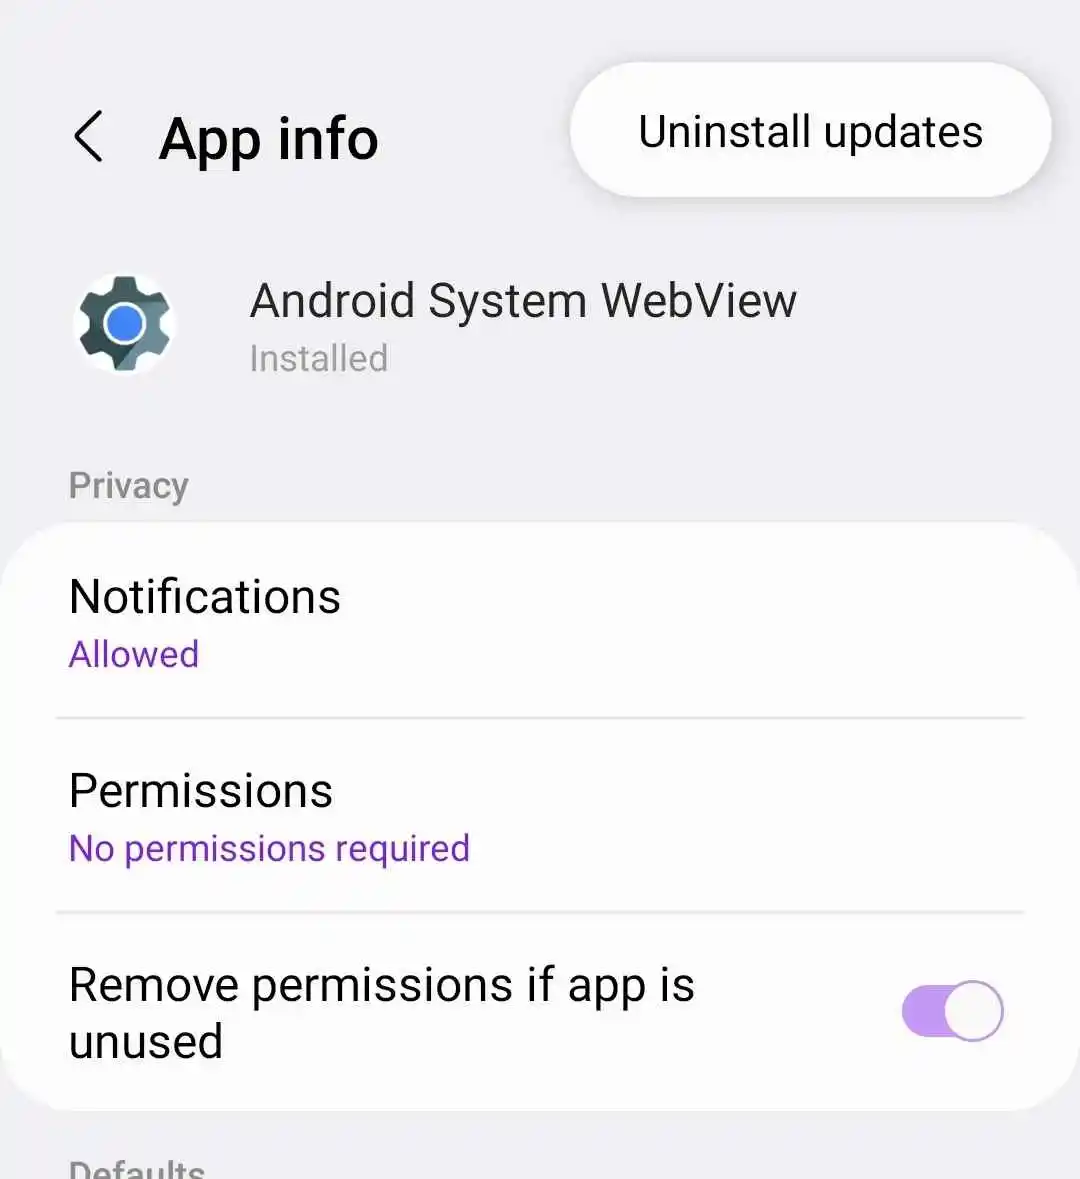 Uninstall Android System WebView update